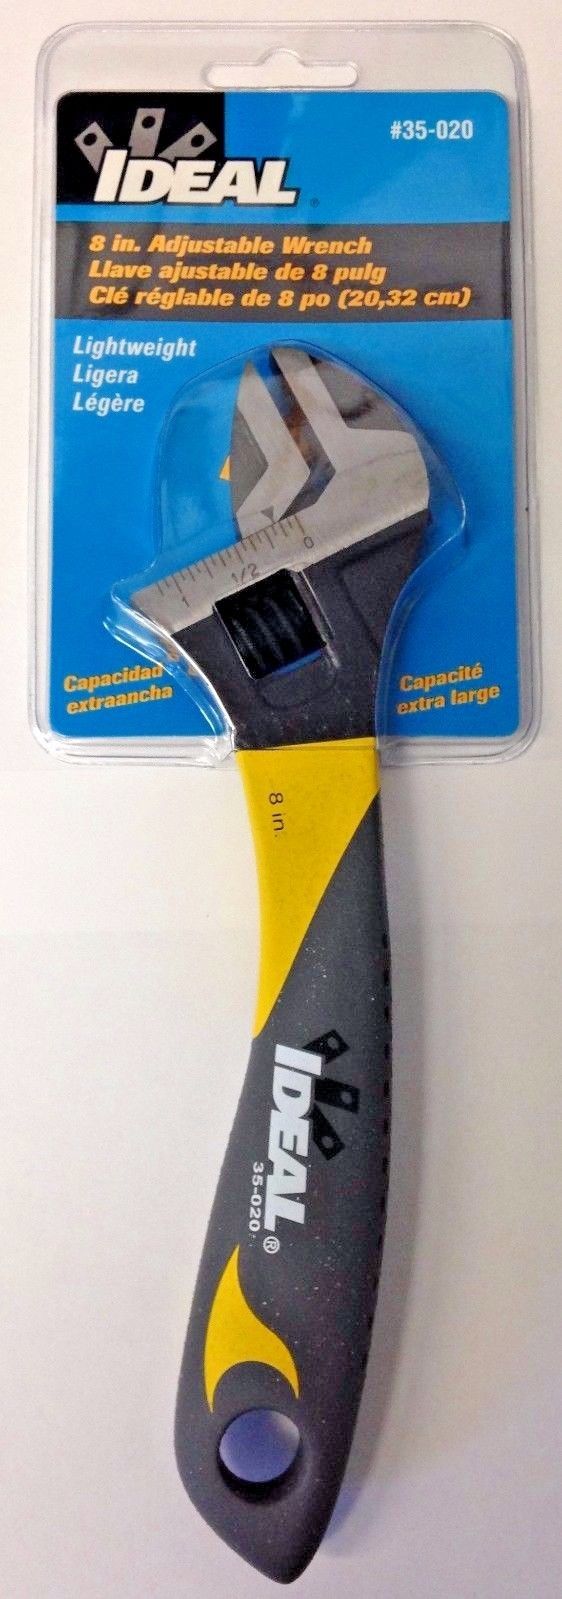 Ideal 35-020 8" Lightweight Adjustable Wrench